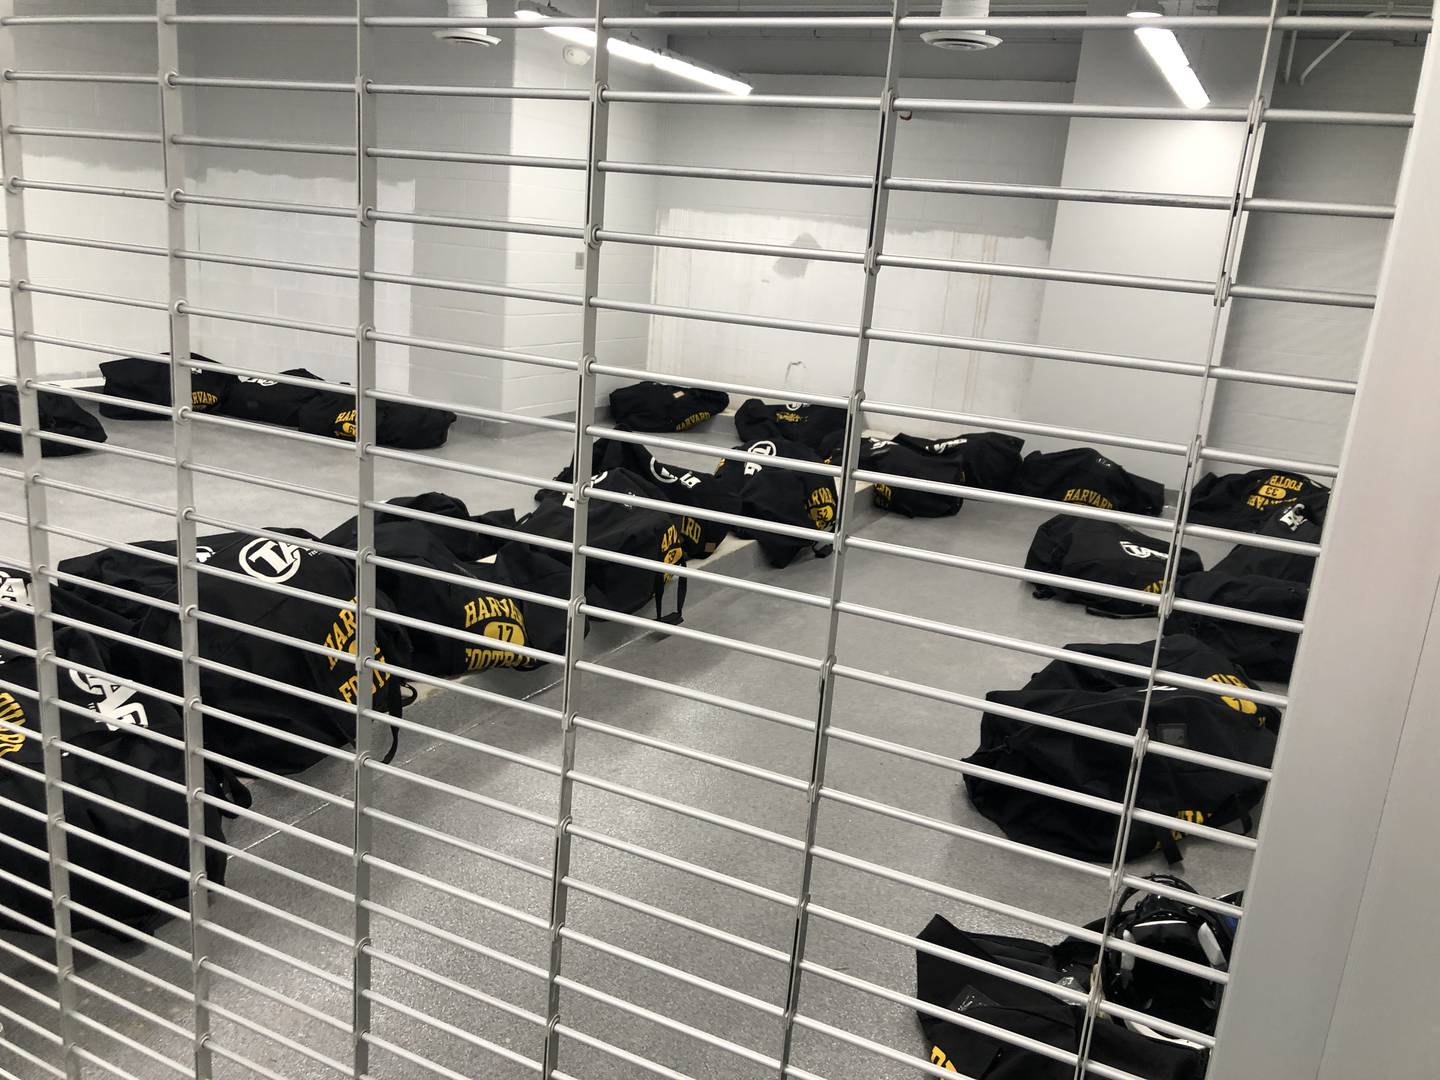 Football equipment sits waiting in duffel bags inside the new locker room's secure area on Aug. 9, 2022. The new lockers are expected in early September, after a seven-month delay.